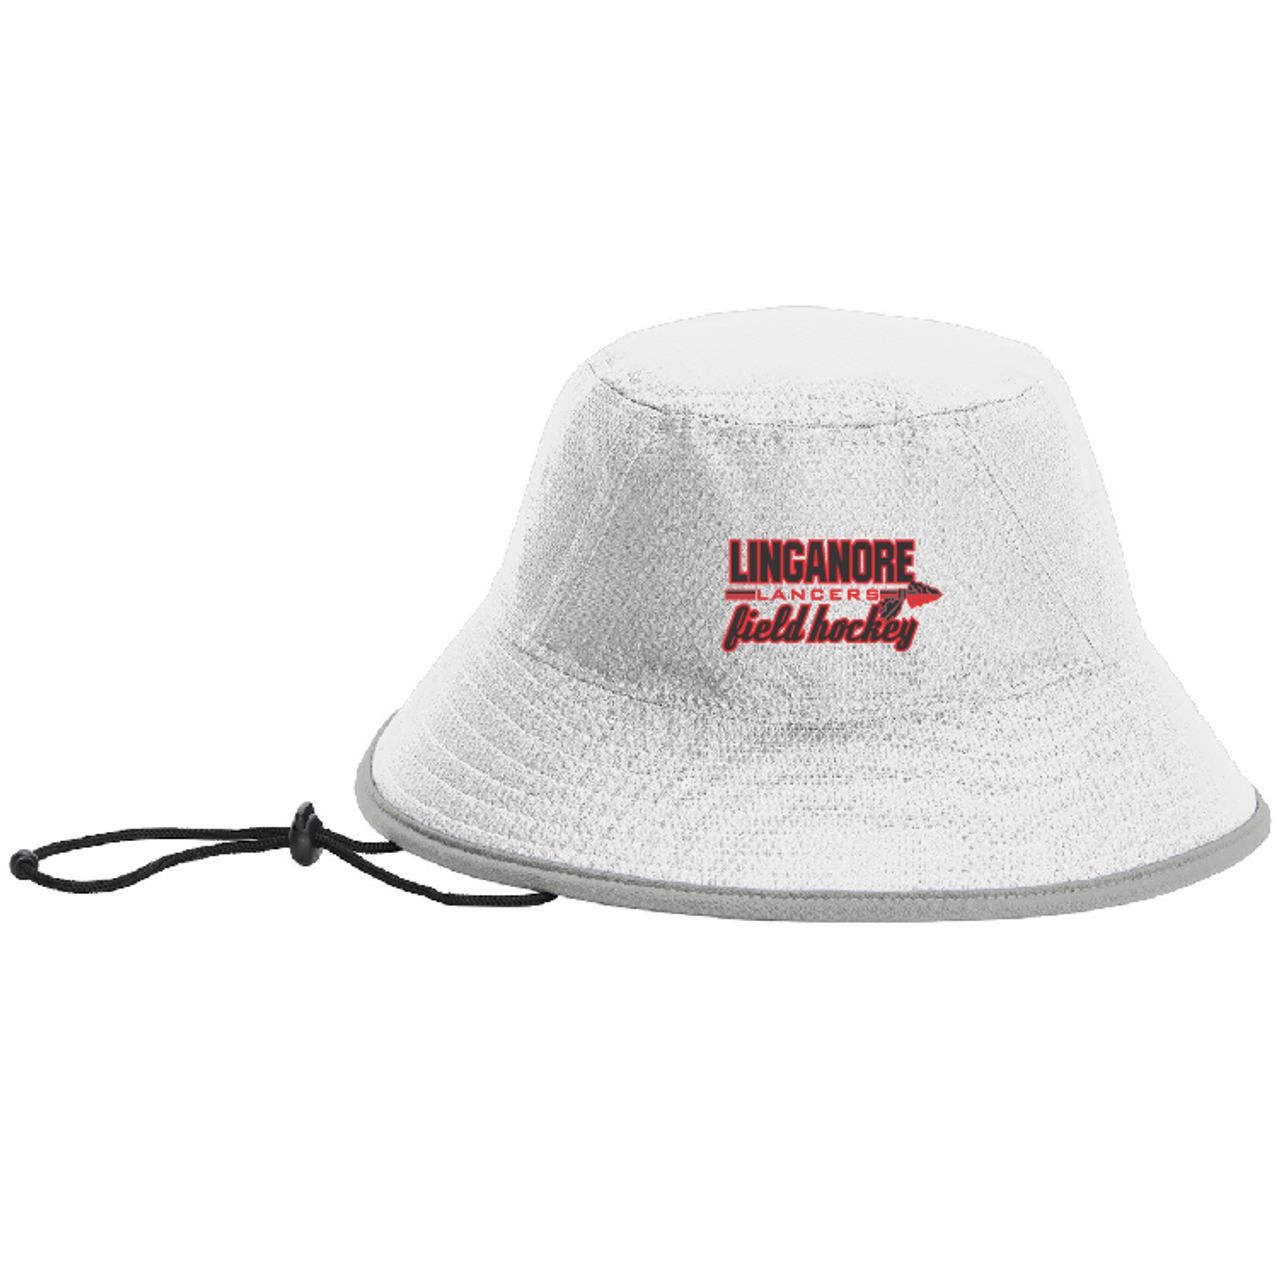 Linganore Lancers FH Bucket Hat